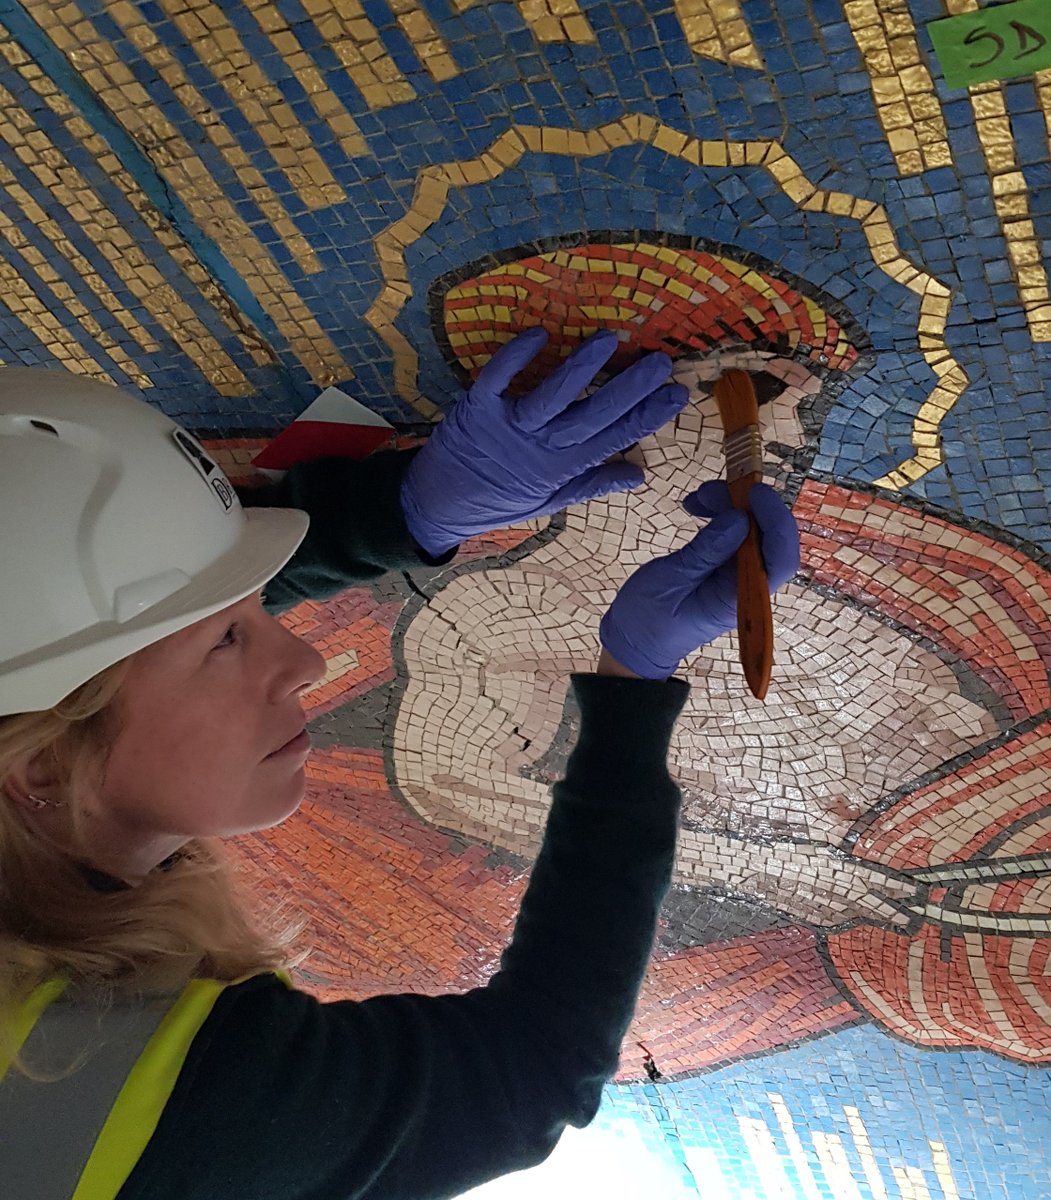 Did you know that the cornice of the Grand Temple is decorated with #mosaics? 👀 It features allegorical symbols typifying Wisdom, Knowledge, and Beauty🌟 Restored in 2020, this masterpiece boasts 1.5 million tiles!  Stay tuned as we unveil more close-ups! 🧩✨ #Freemasons